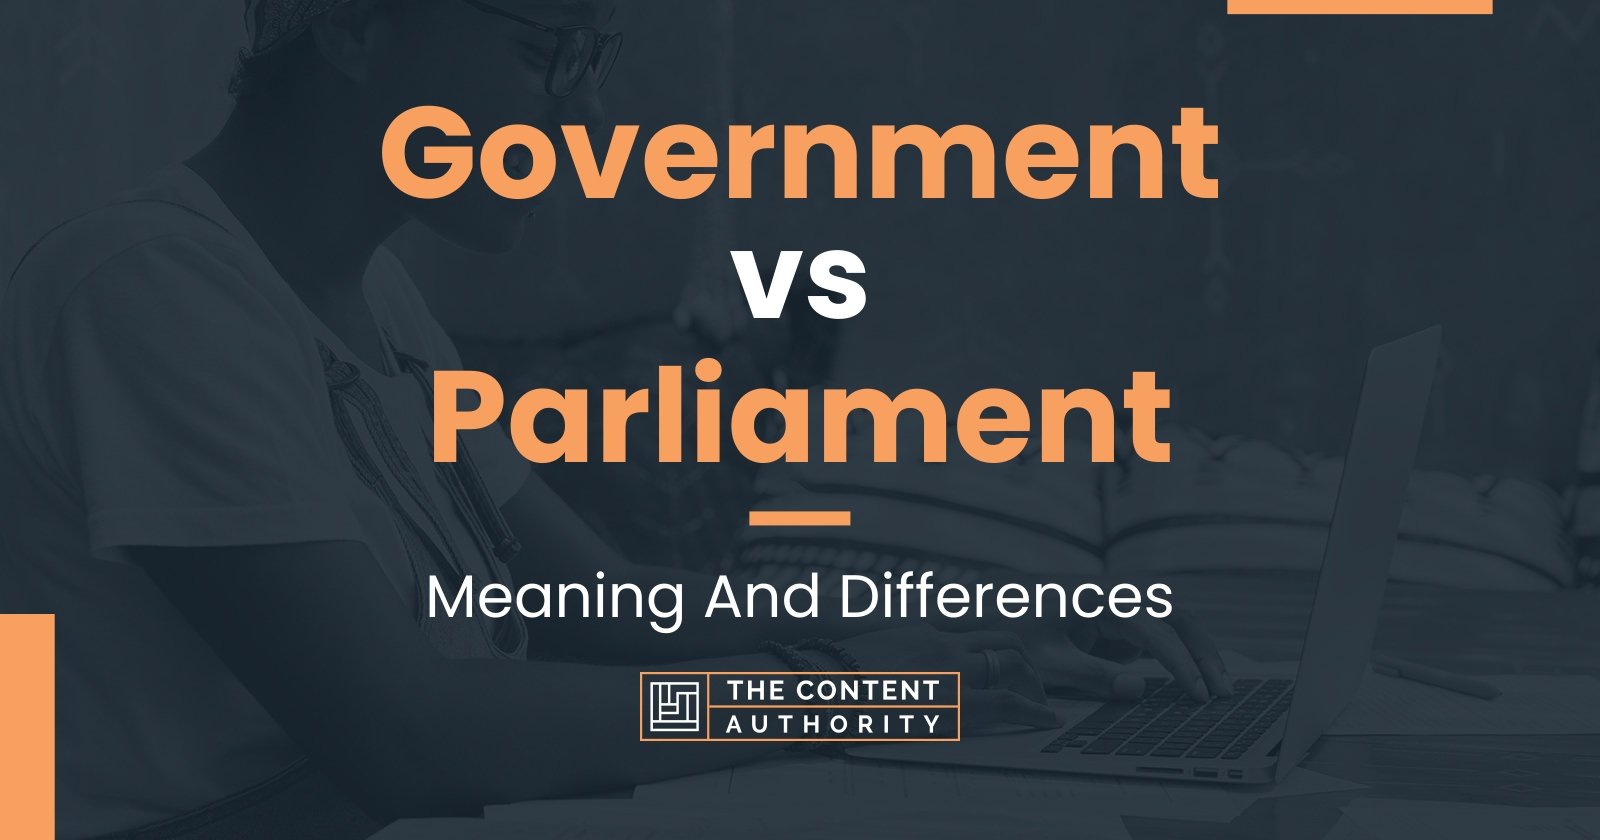 Government vs Parliament: Meaning And Differences